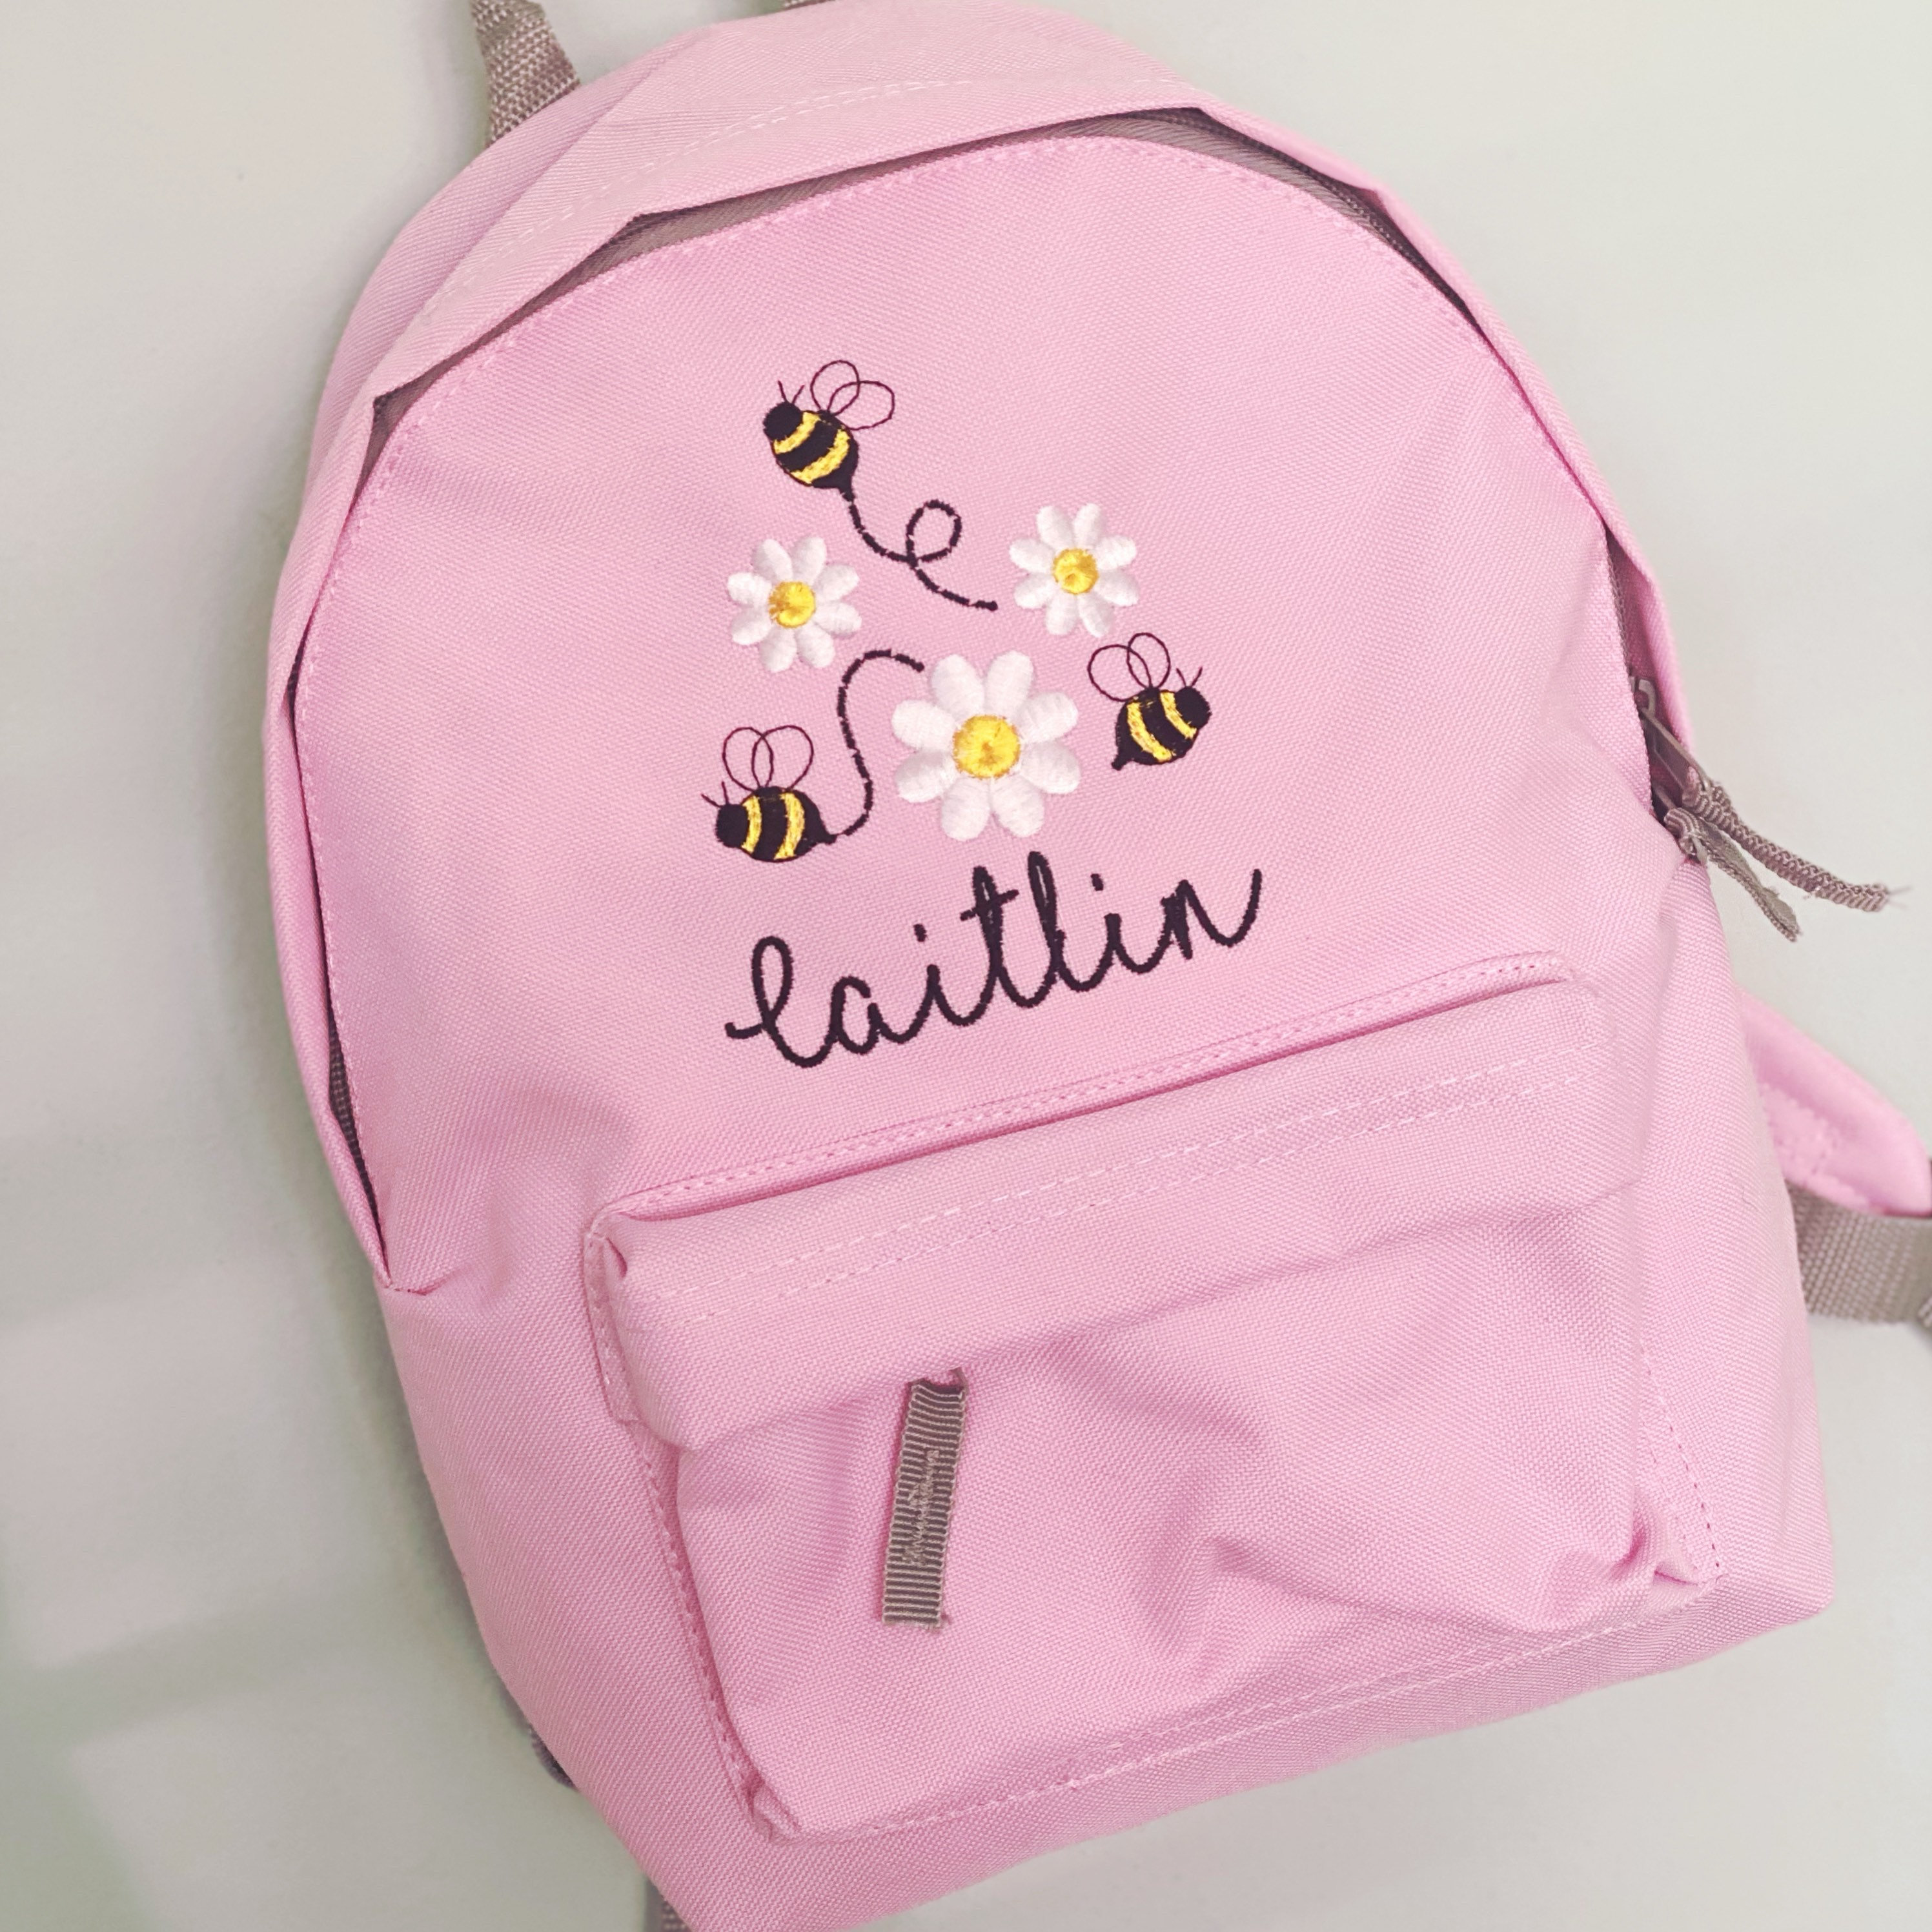 Bee Backpack - Cute Bee School Bag for Toddlers in Yellow, Black and white  — Chub and Bug Illustration | Wall art and school supplies for kids and